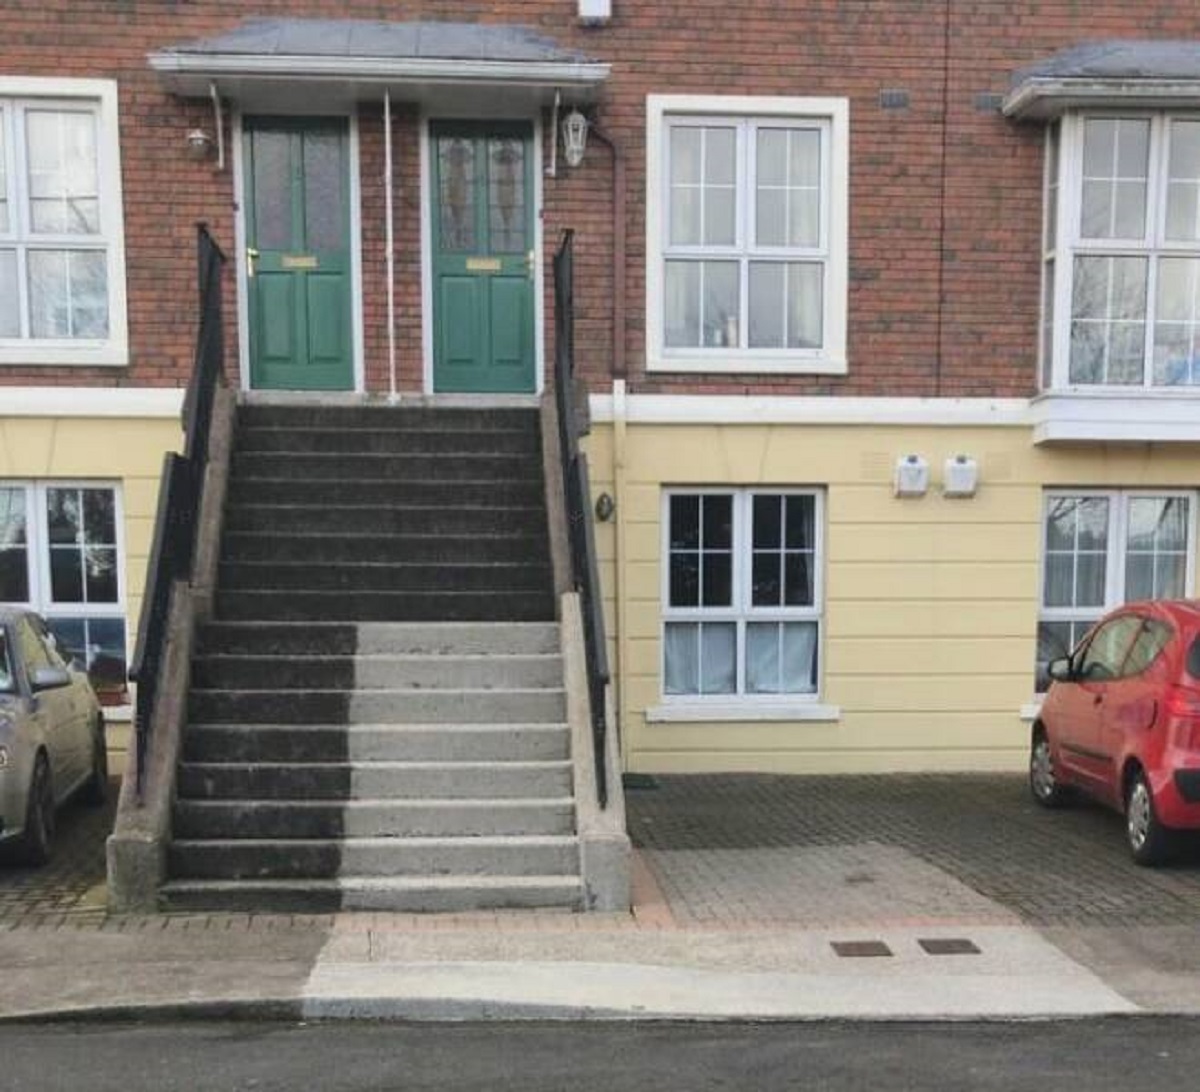 "This house had a section power washed by mistake, but it looks like sunlight!"